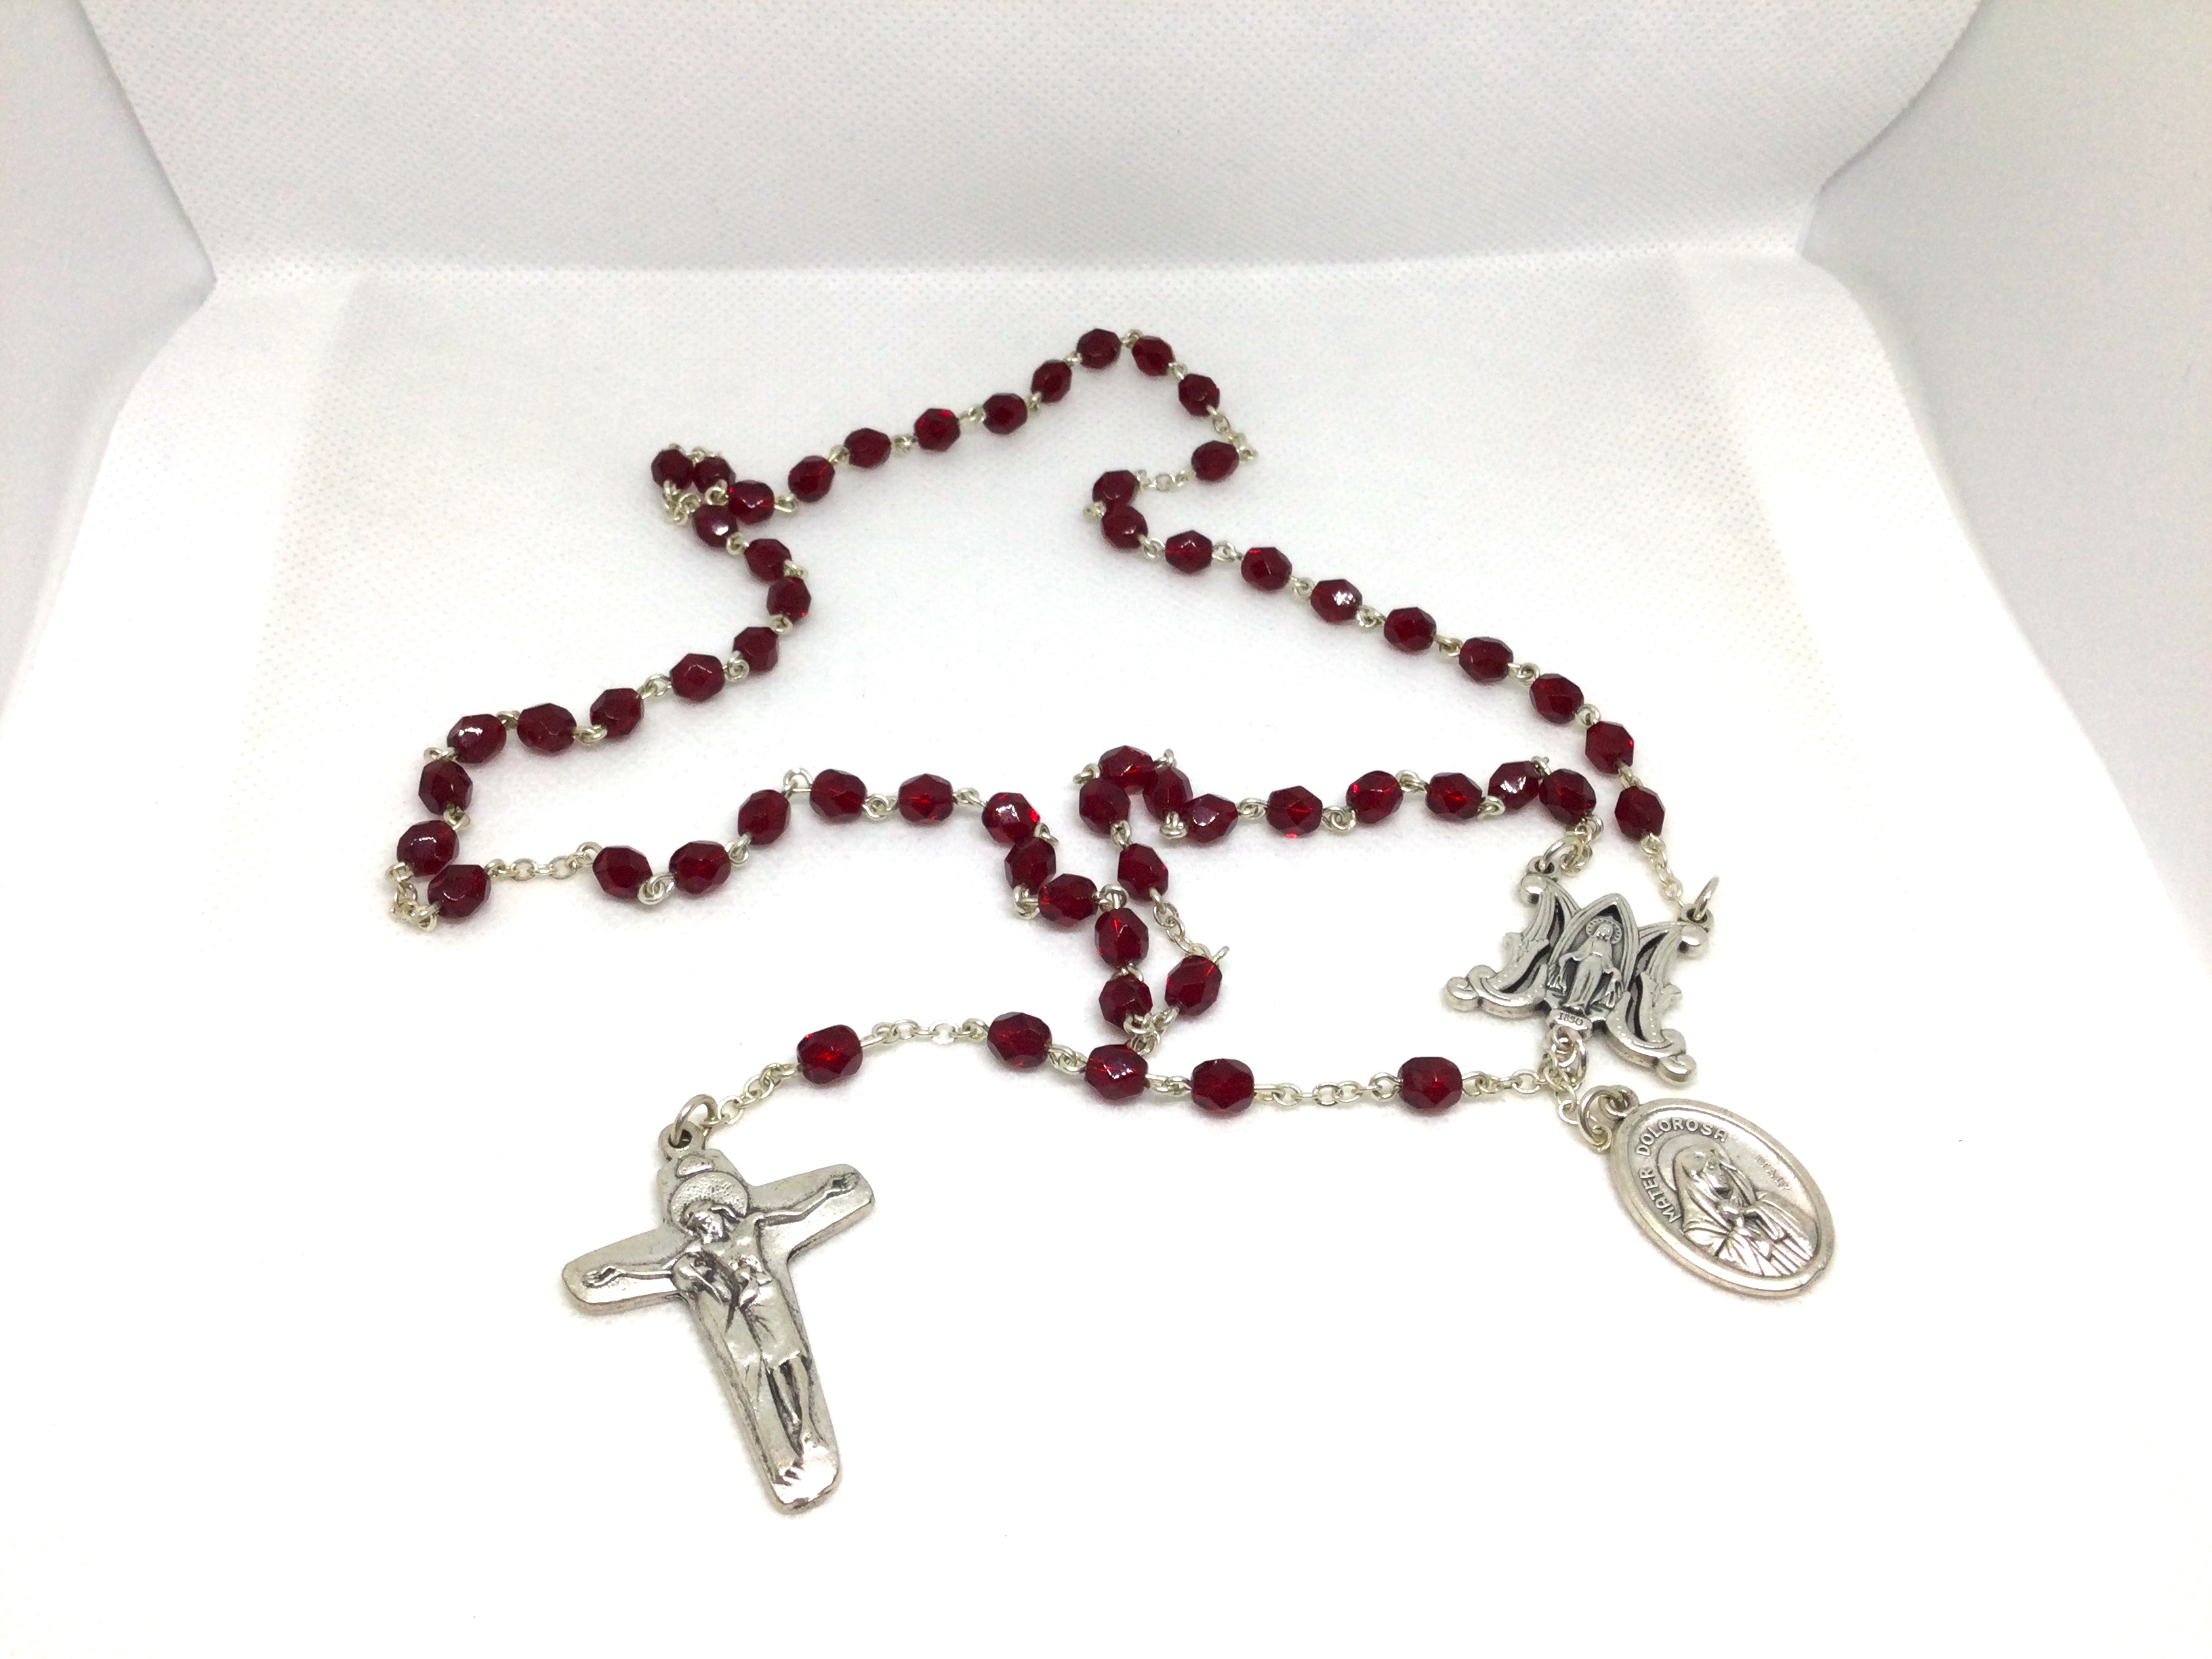 Blessed Beads Rosaries Scholastica